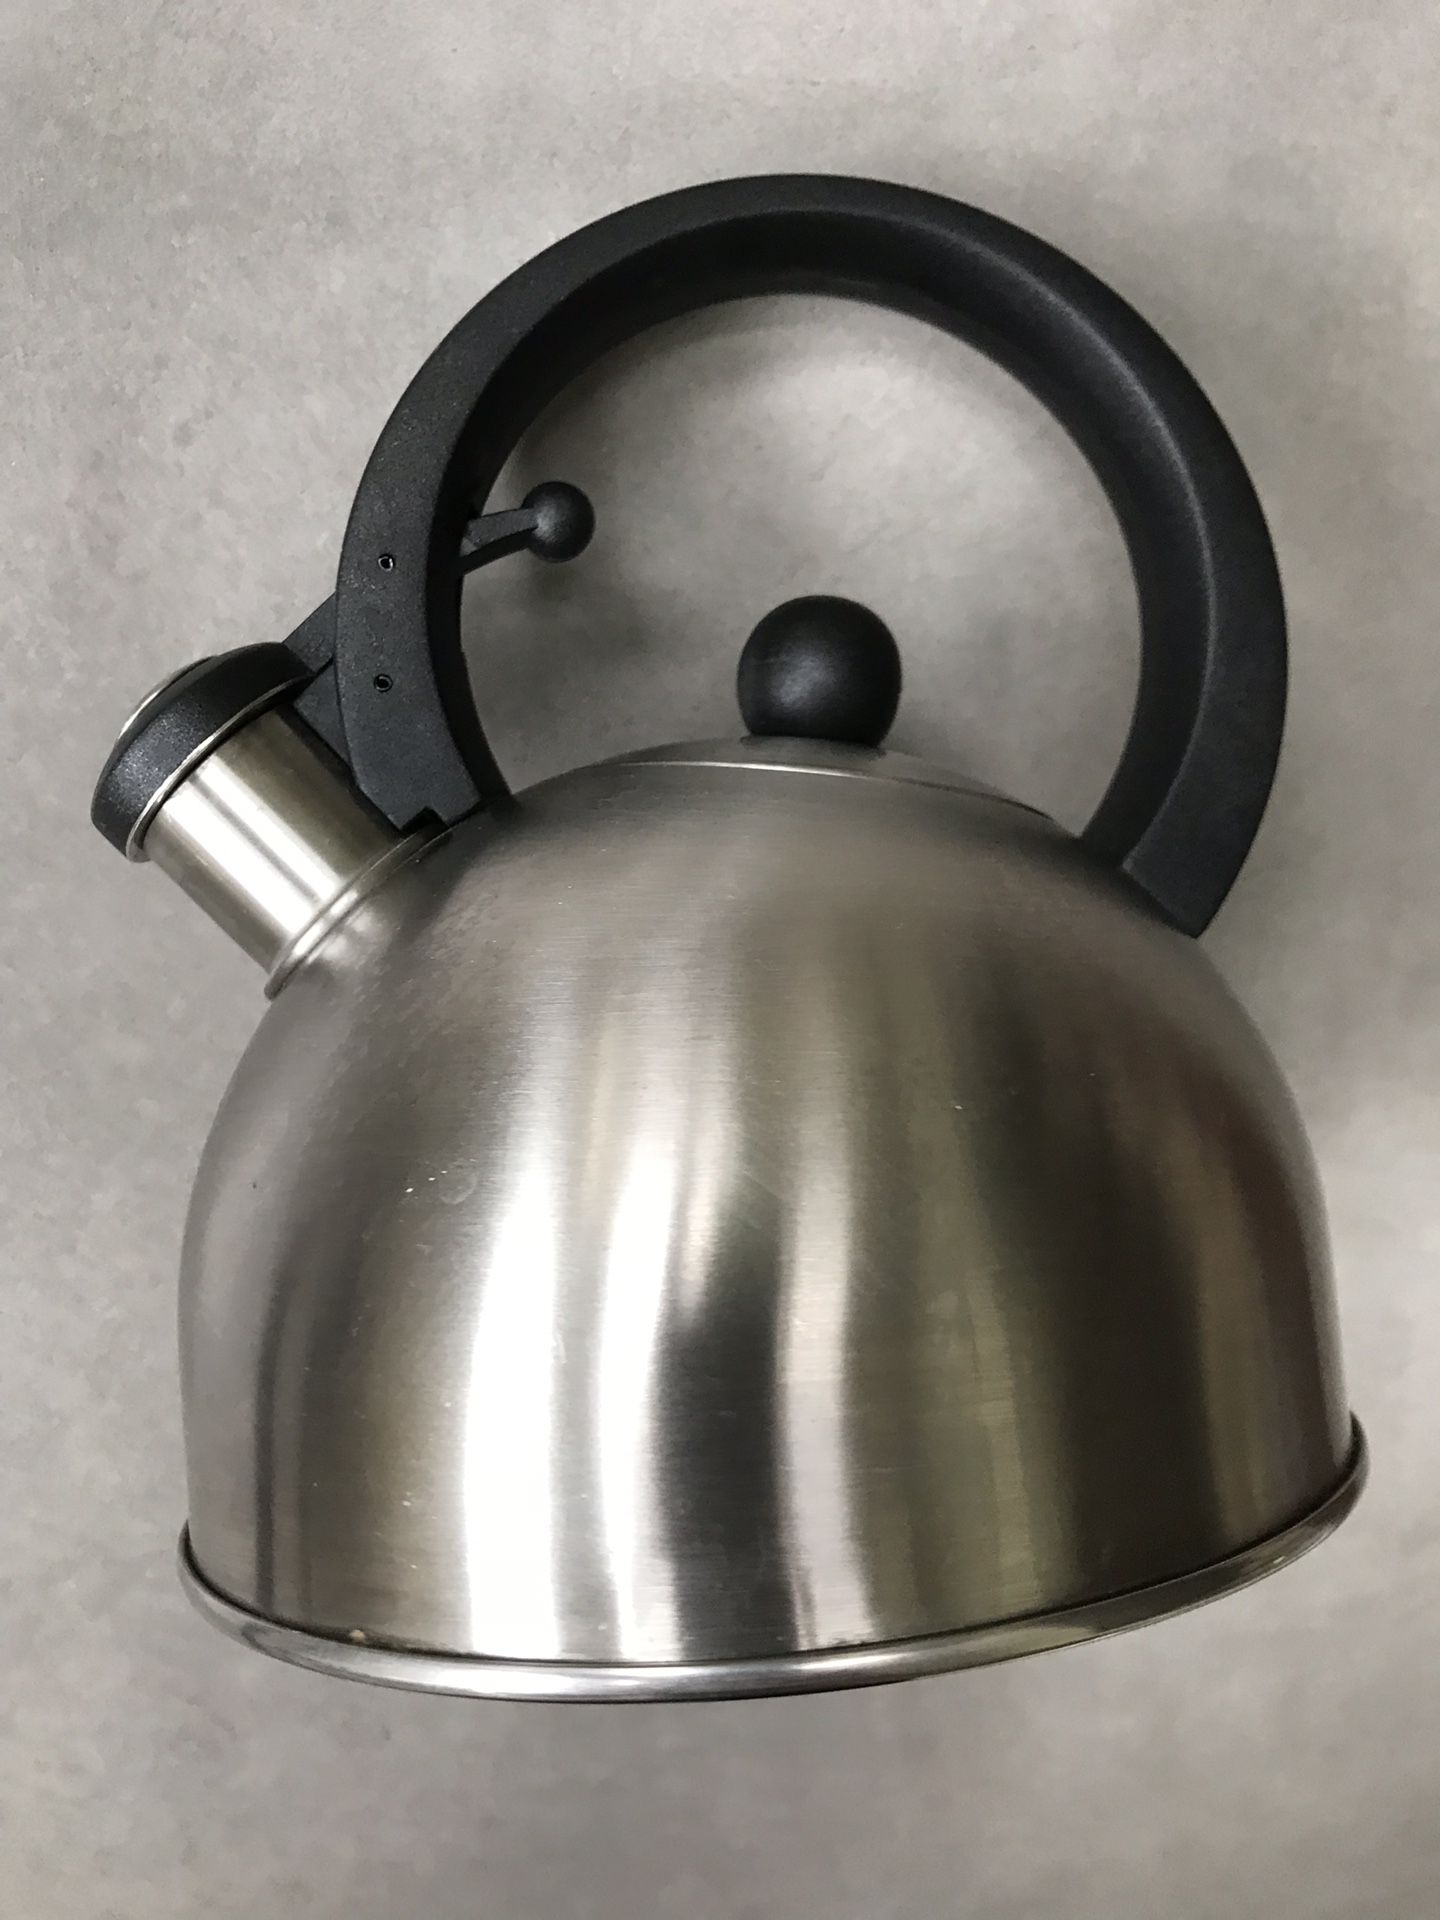 Kettle for stove top